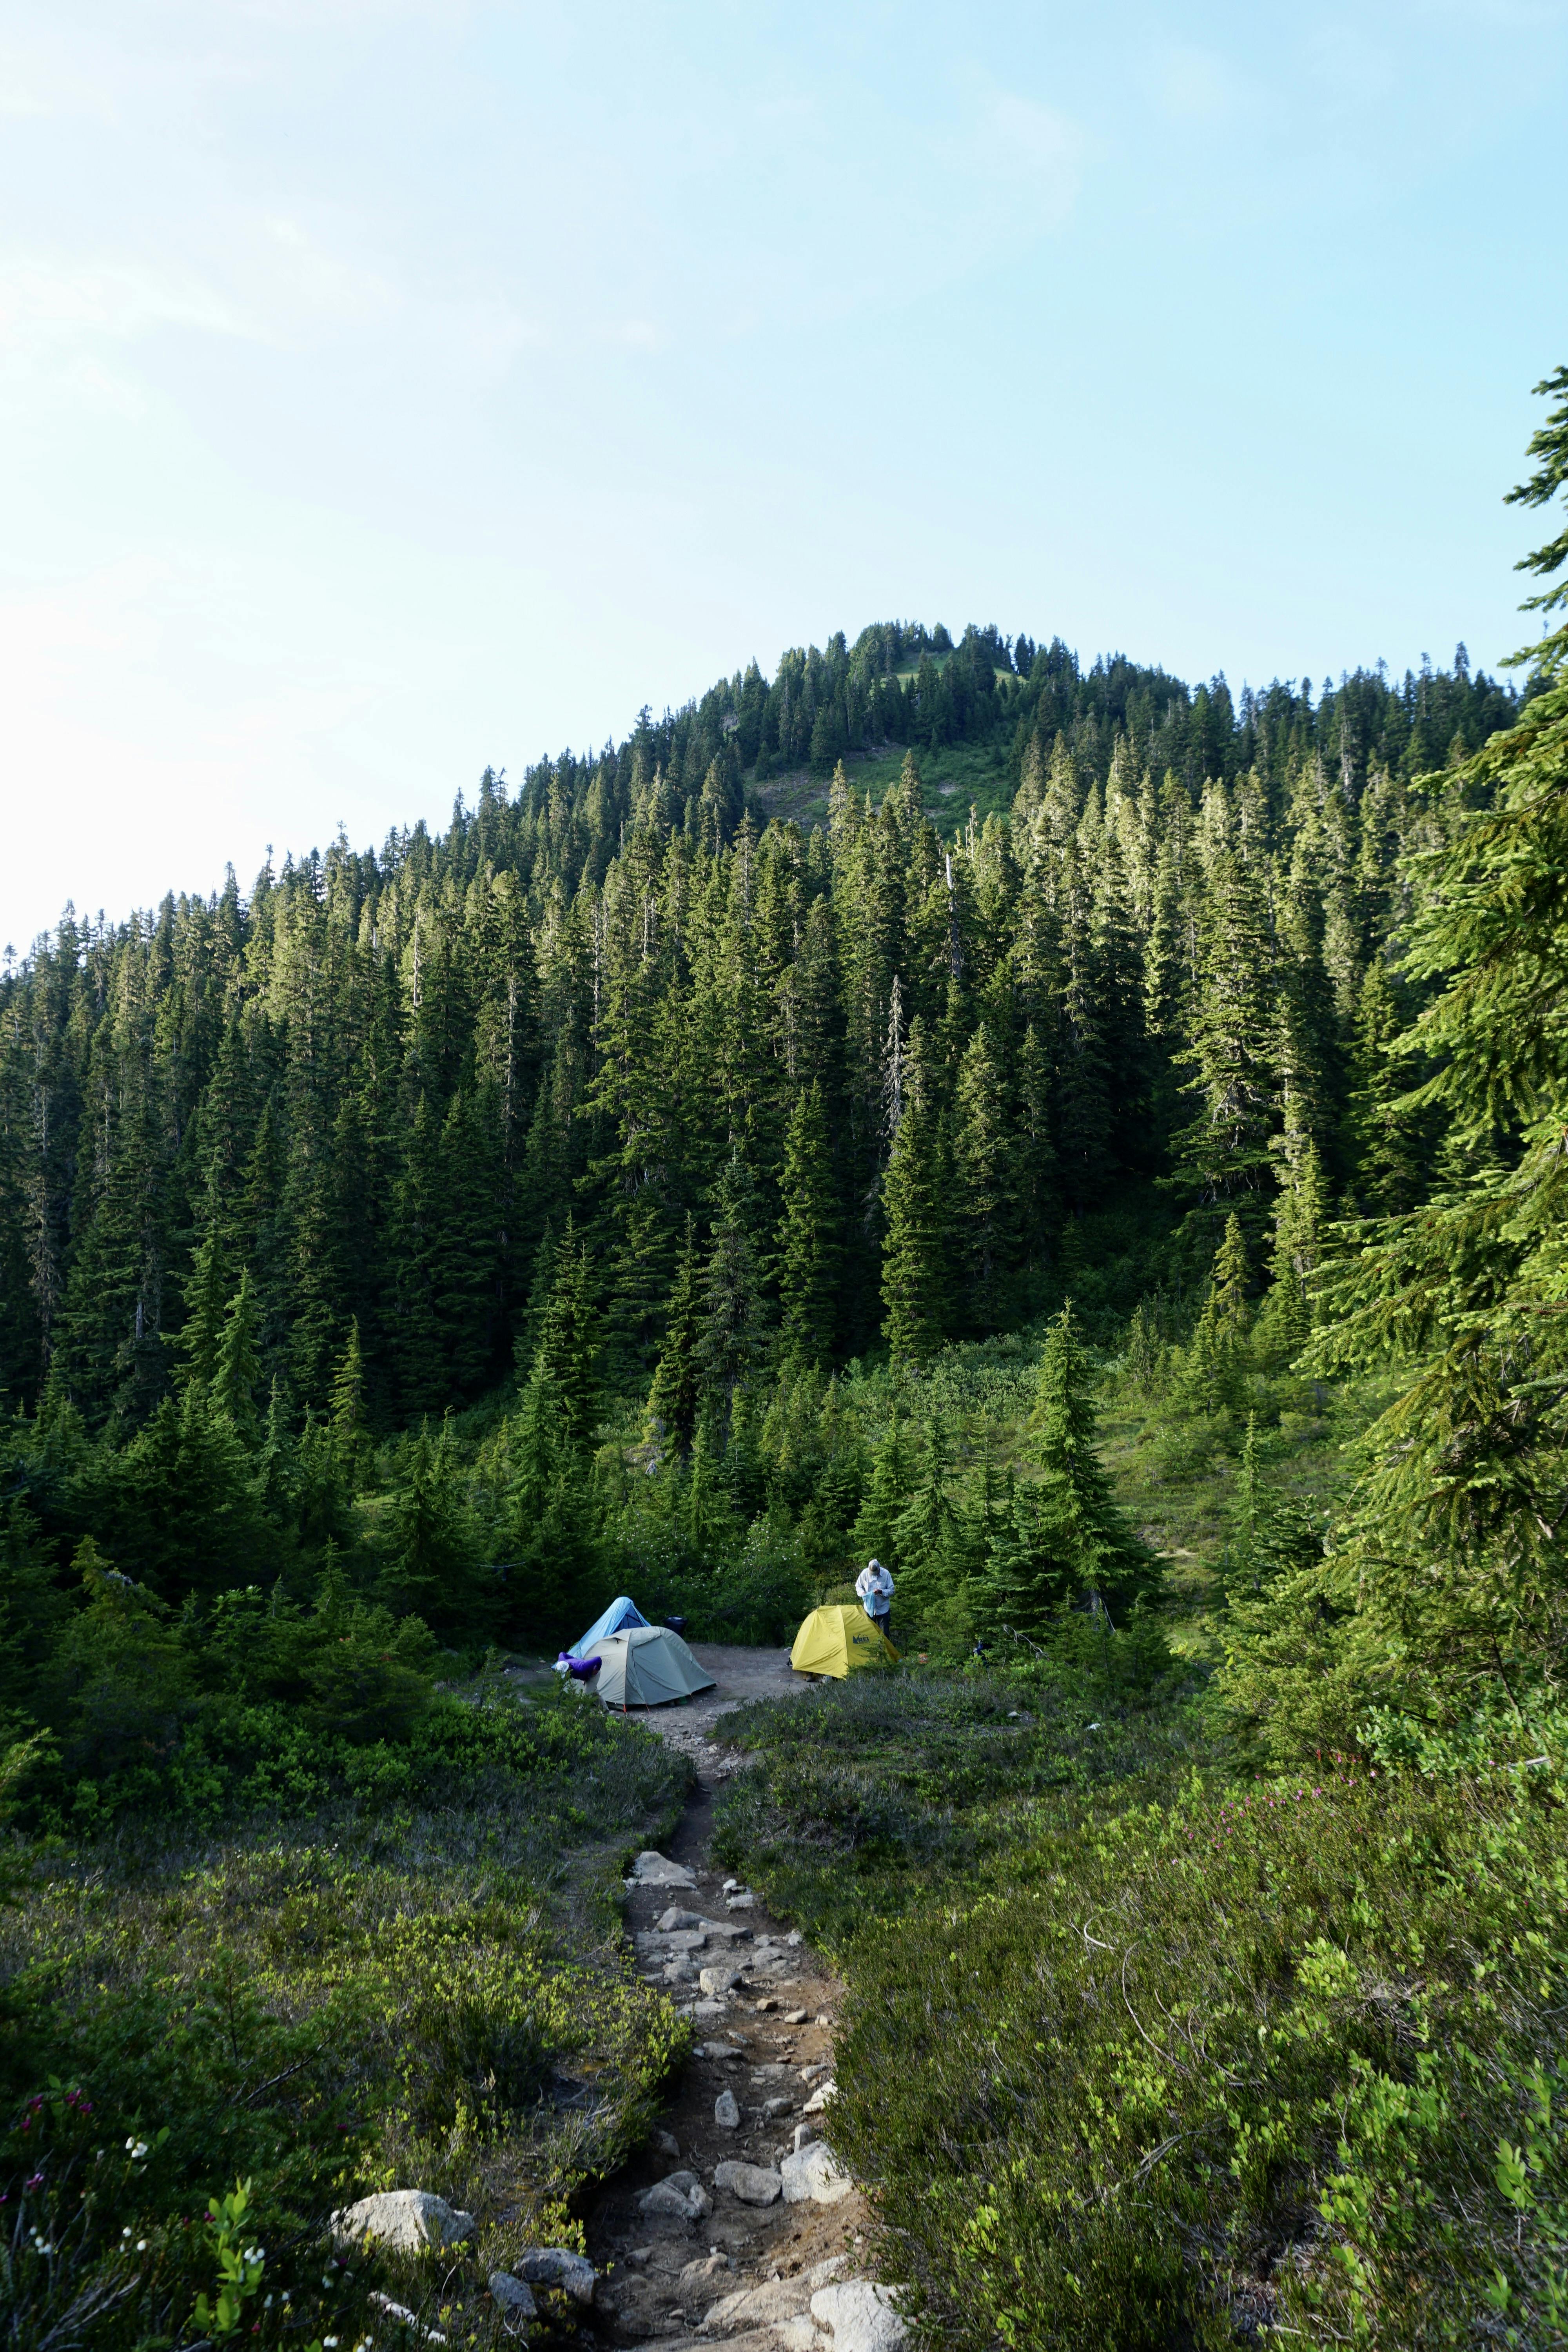 Campsite at Hannegan Camp on a sunny day. Image credit: Doris Wang